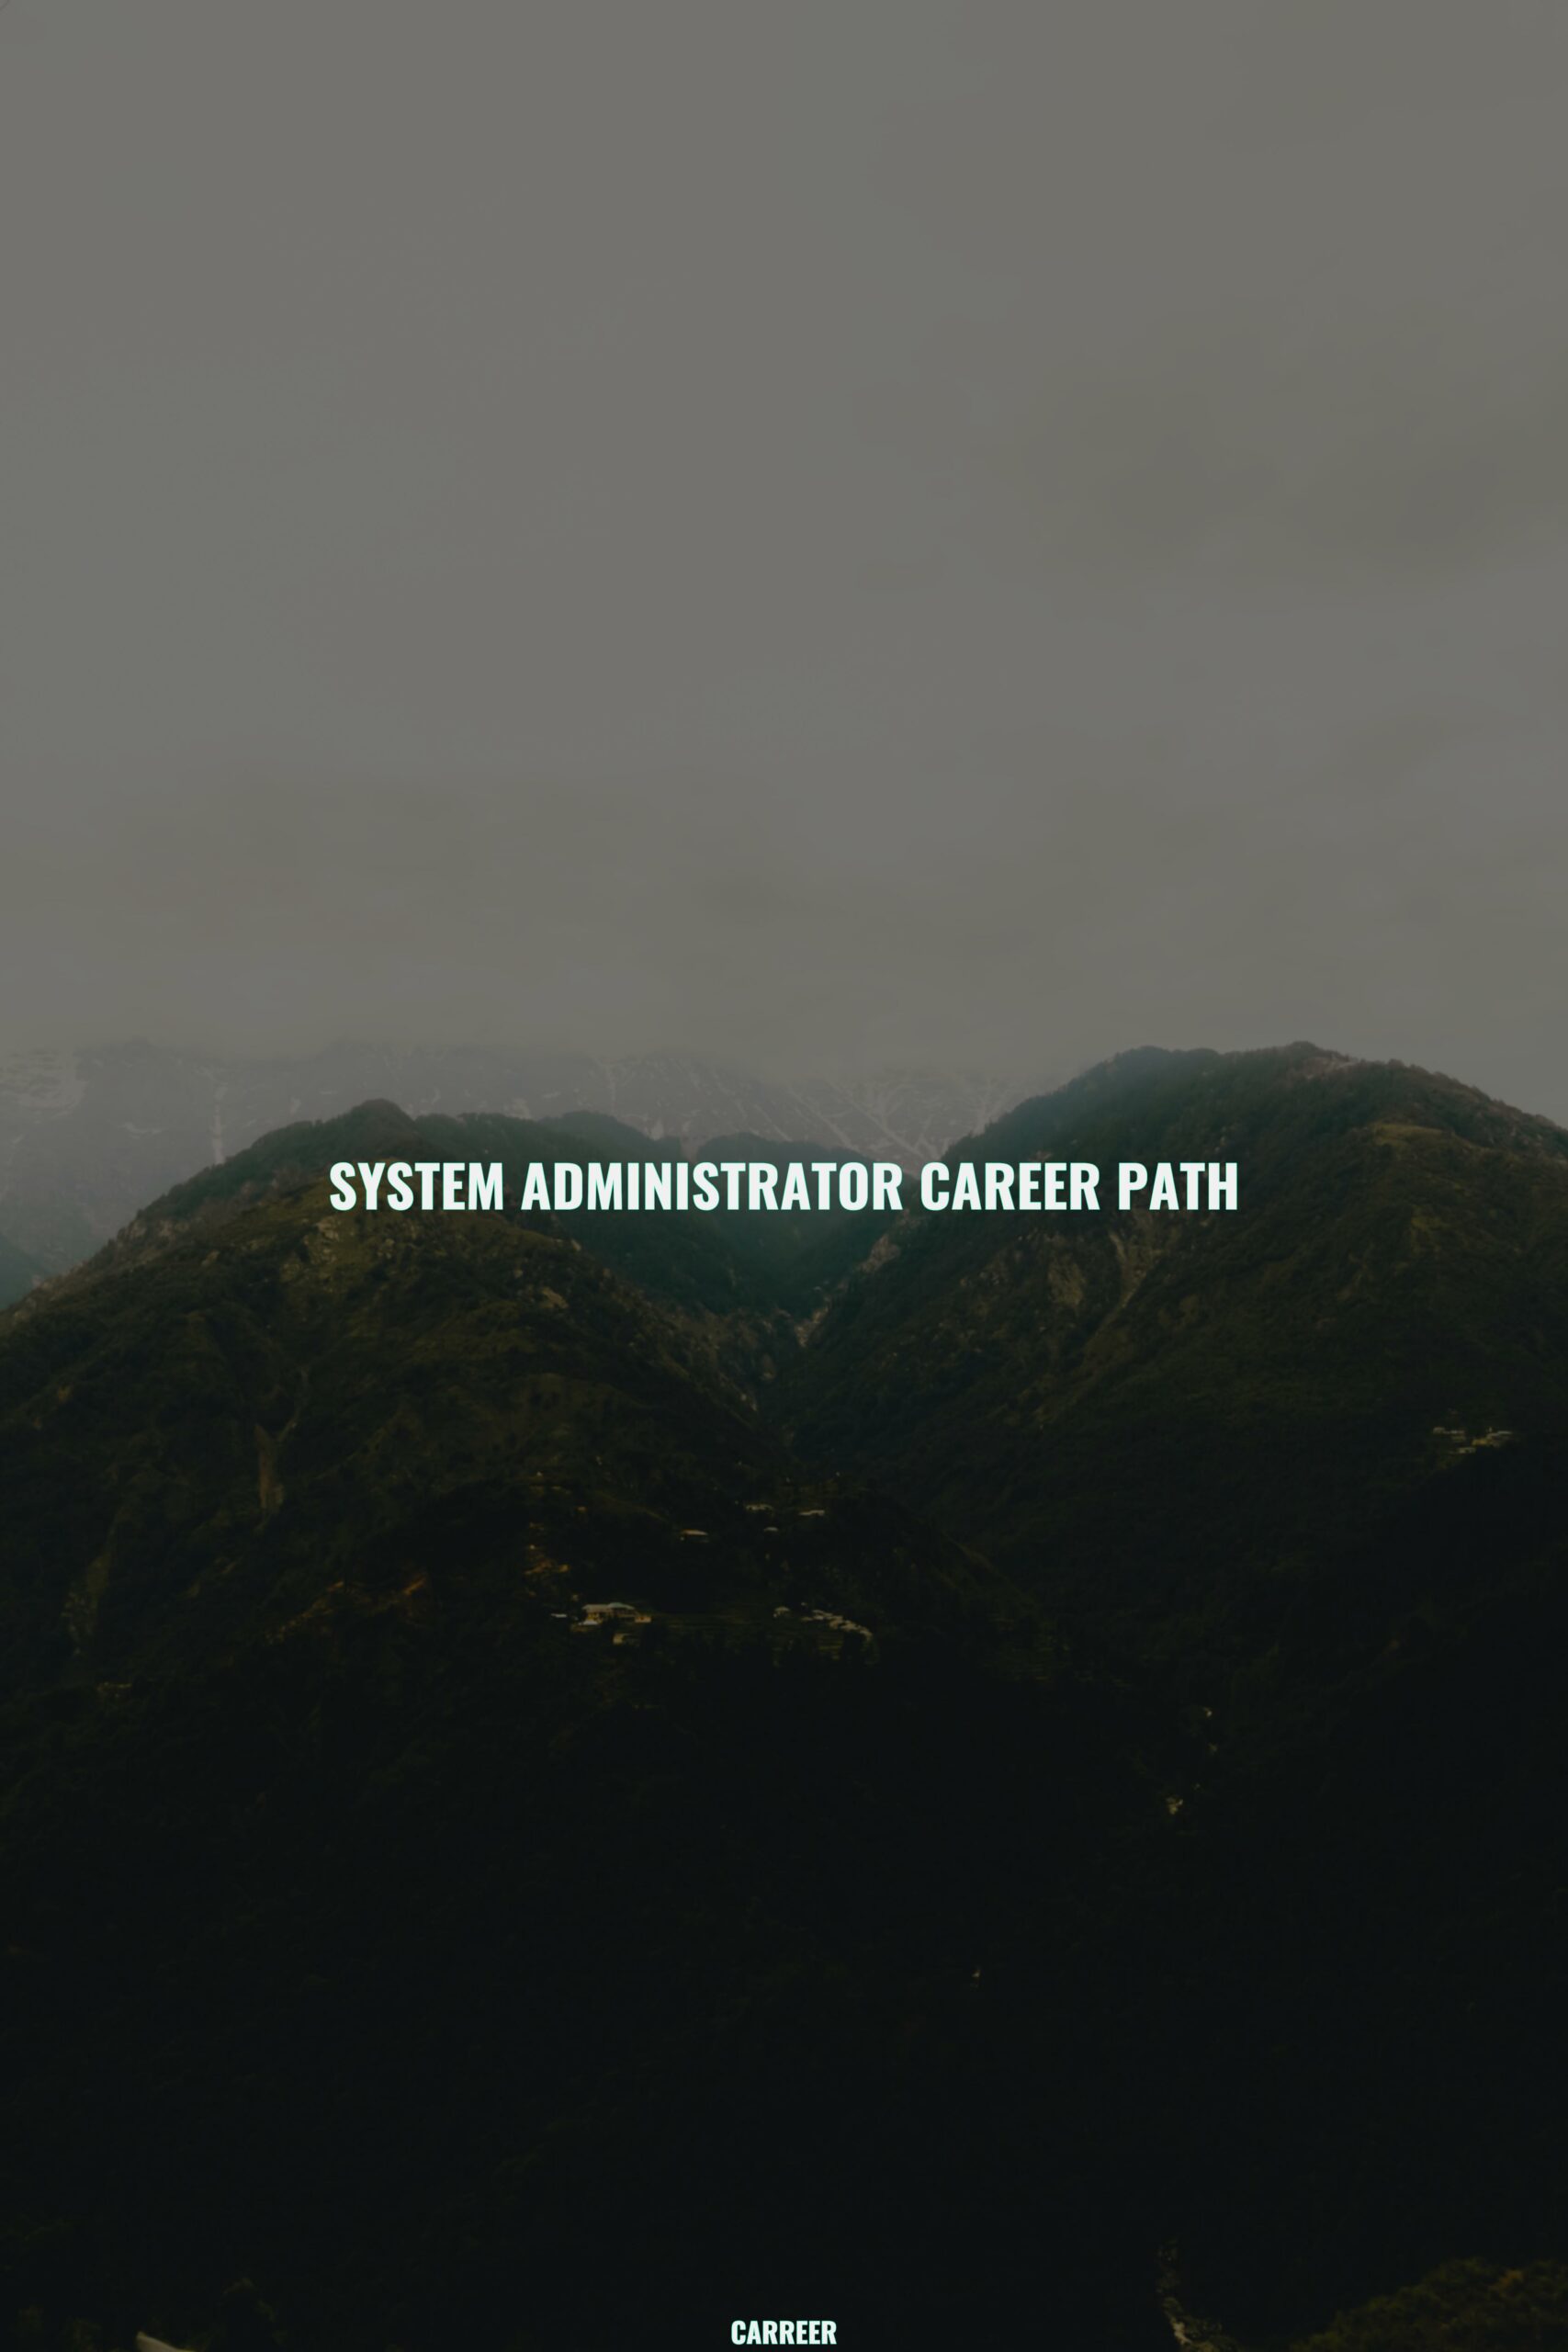 System administrator career path